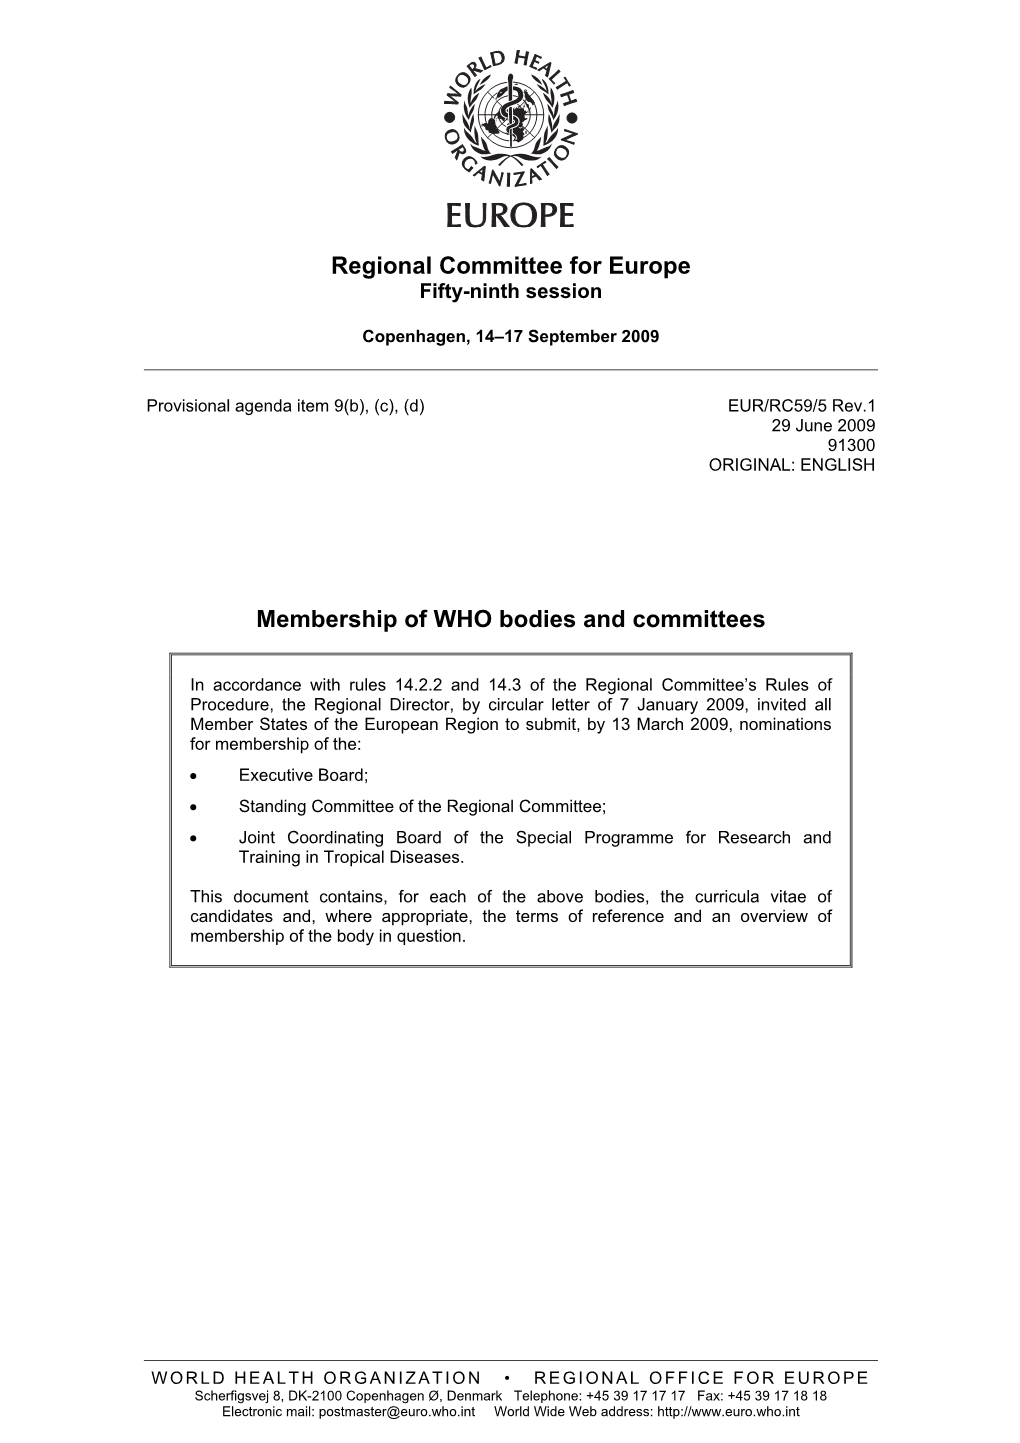 Membership of WHO Bodies and Committees